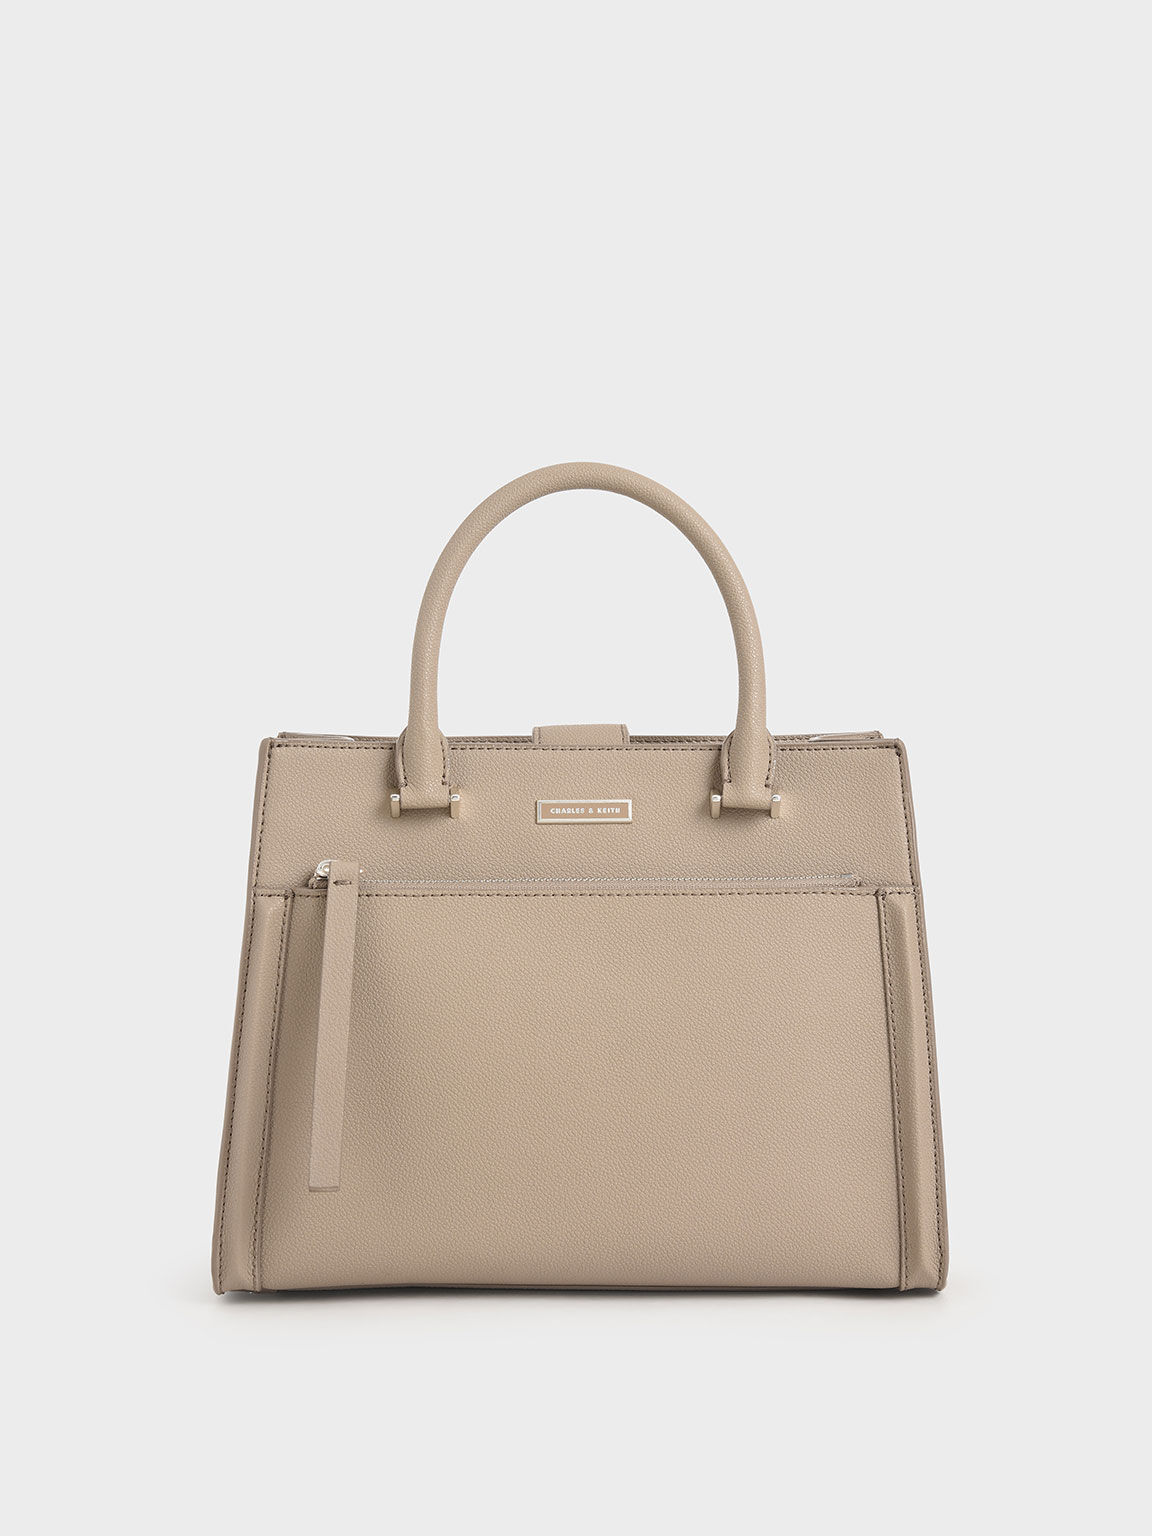 Women's Tote Bags | Shop Exclusive Styles - CHARLES & KEITH US